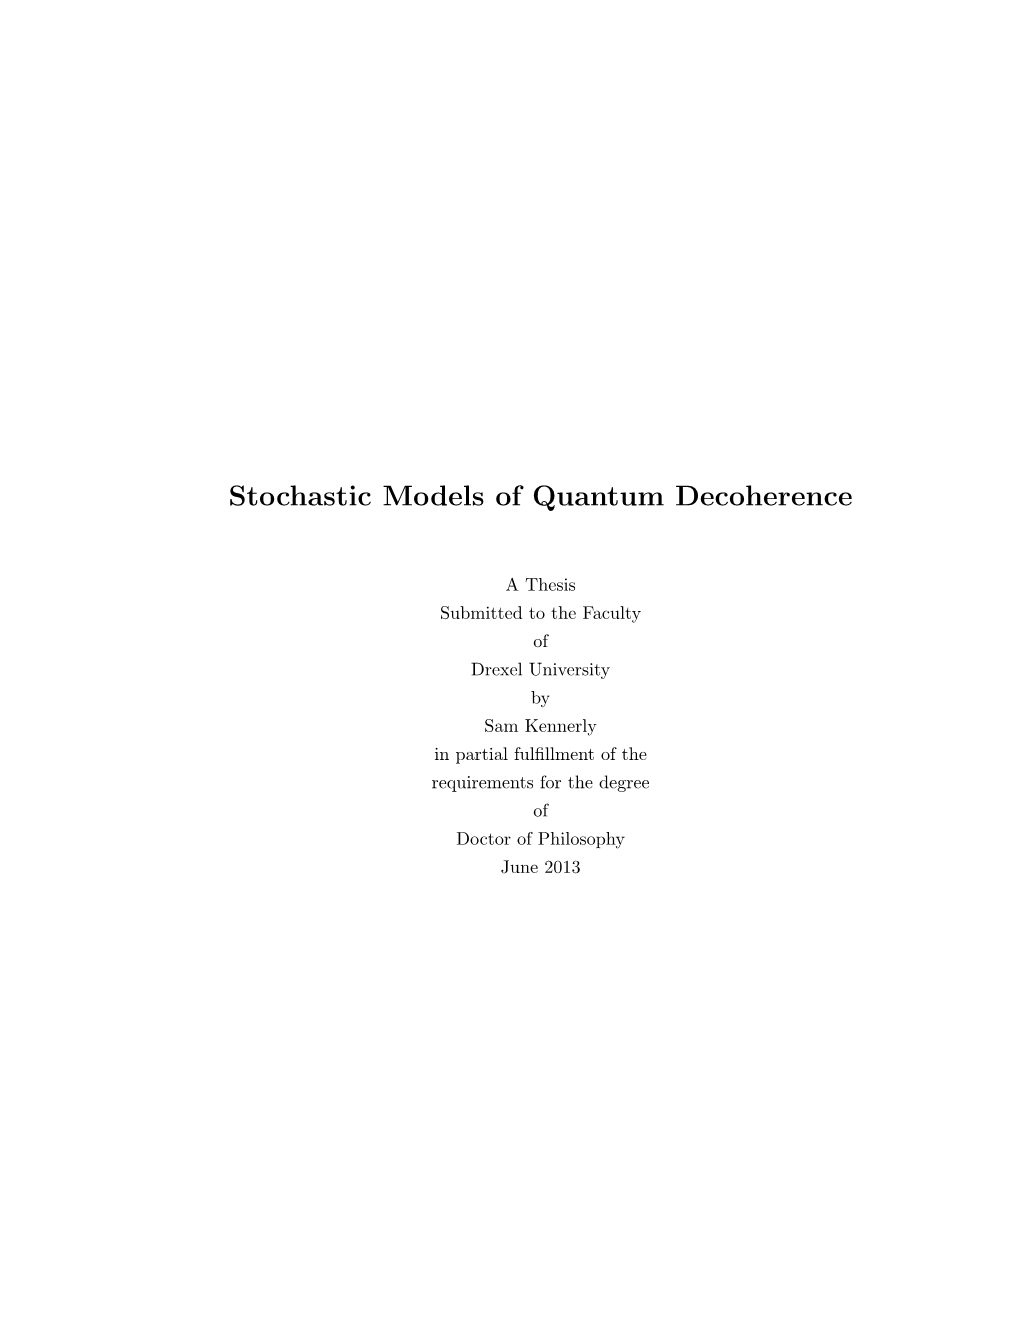 Stochastic Models of Quantum Decoherence